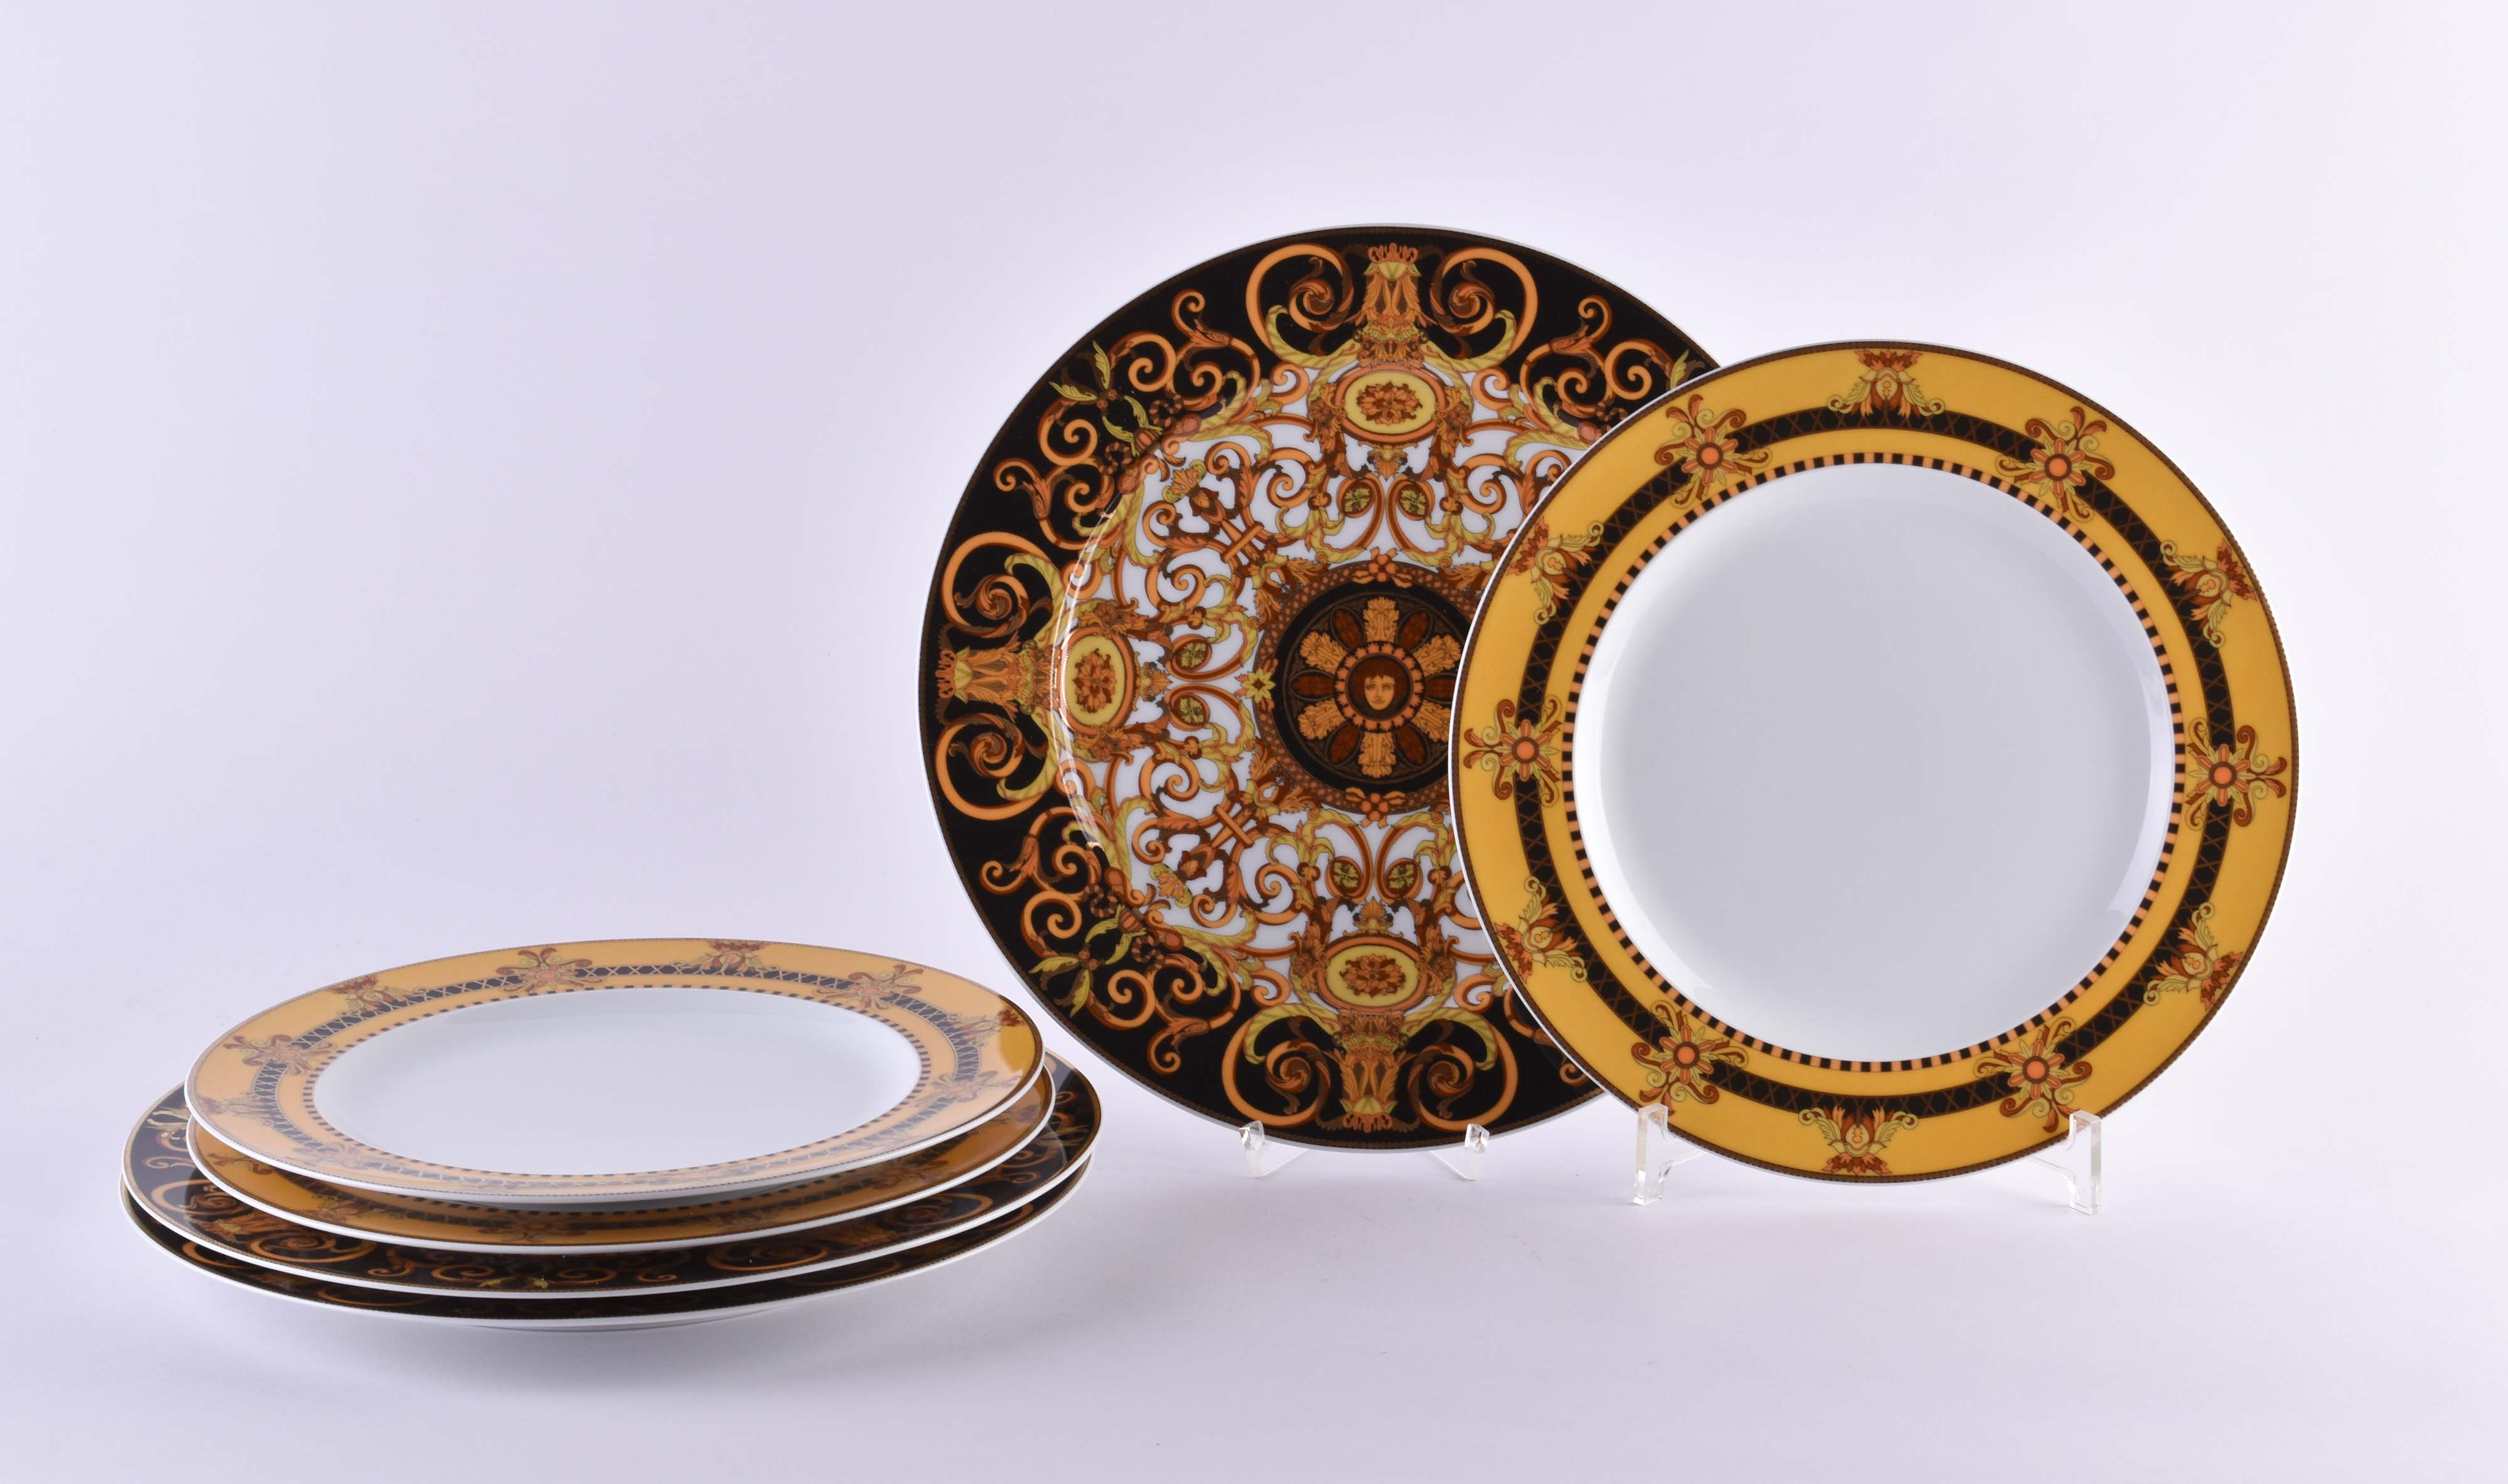 Group of porcelain, dinner plates Rosenthal Versace Barocco 